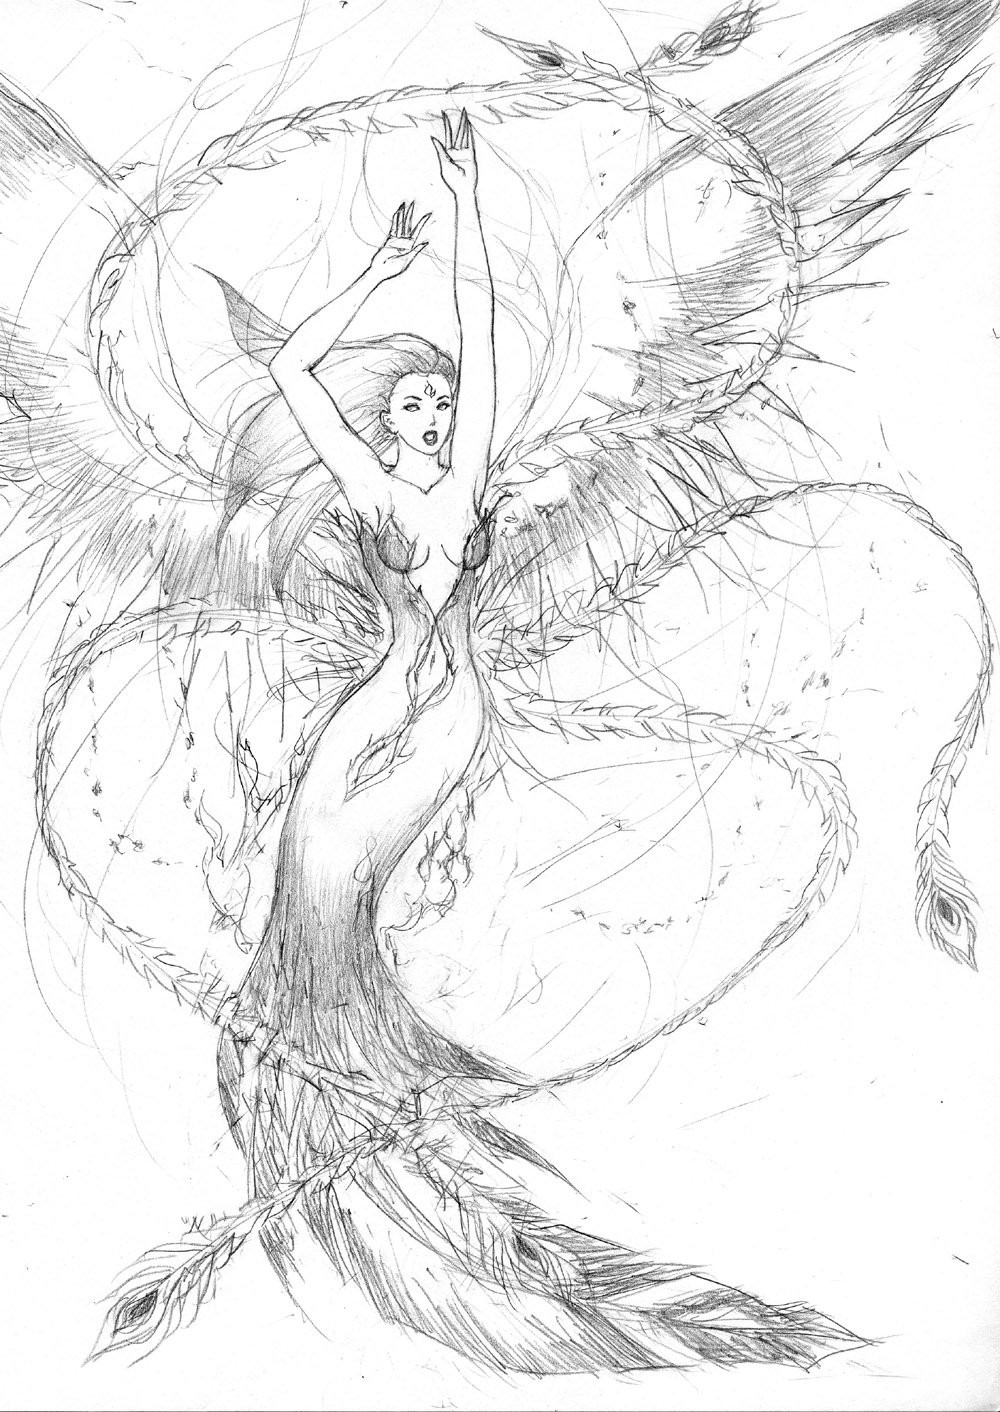 Pheonix Coloring Pages
 Phoenix Maiden by Aerythes on DeviantArt